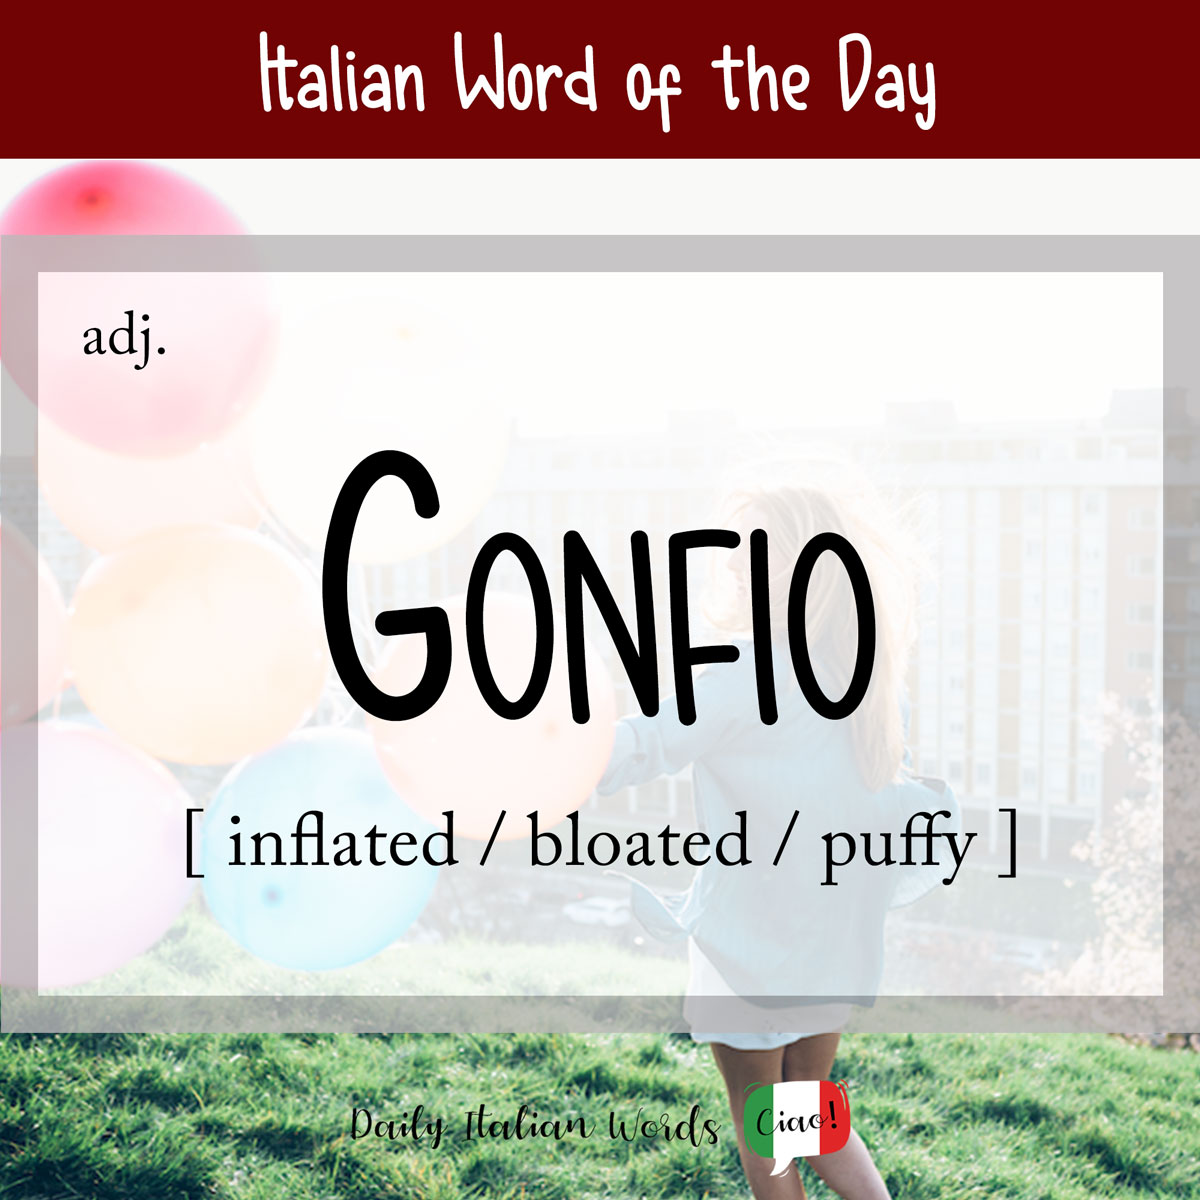 Italian word of the day: Gonfio (swelling/swelling)